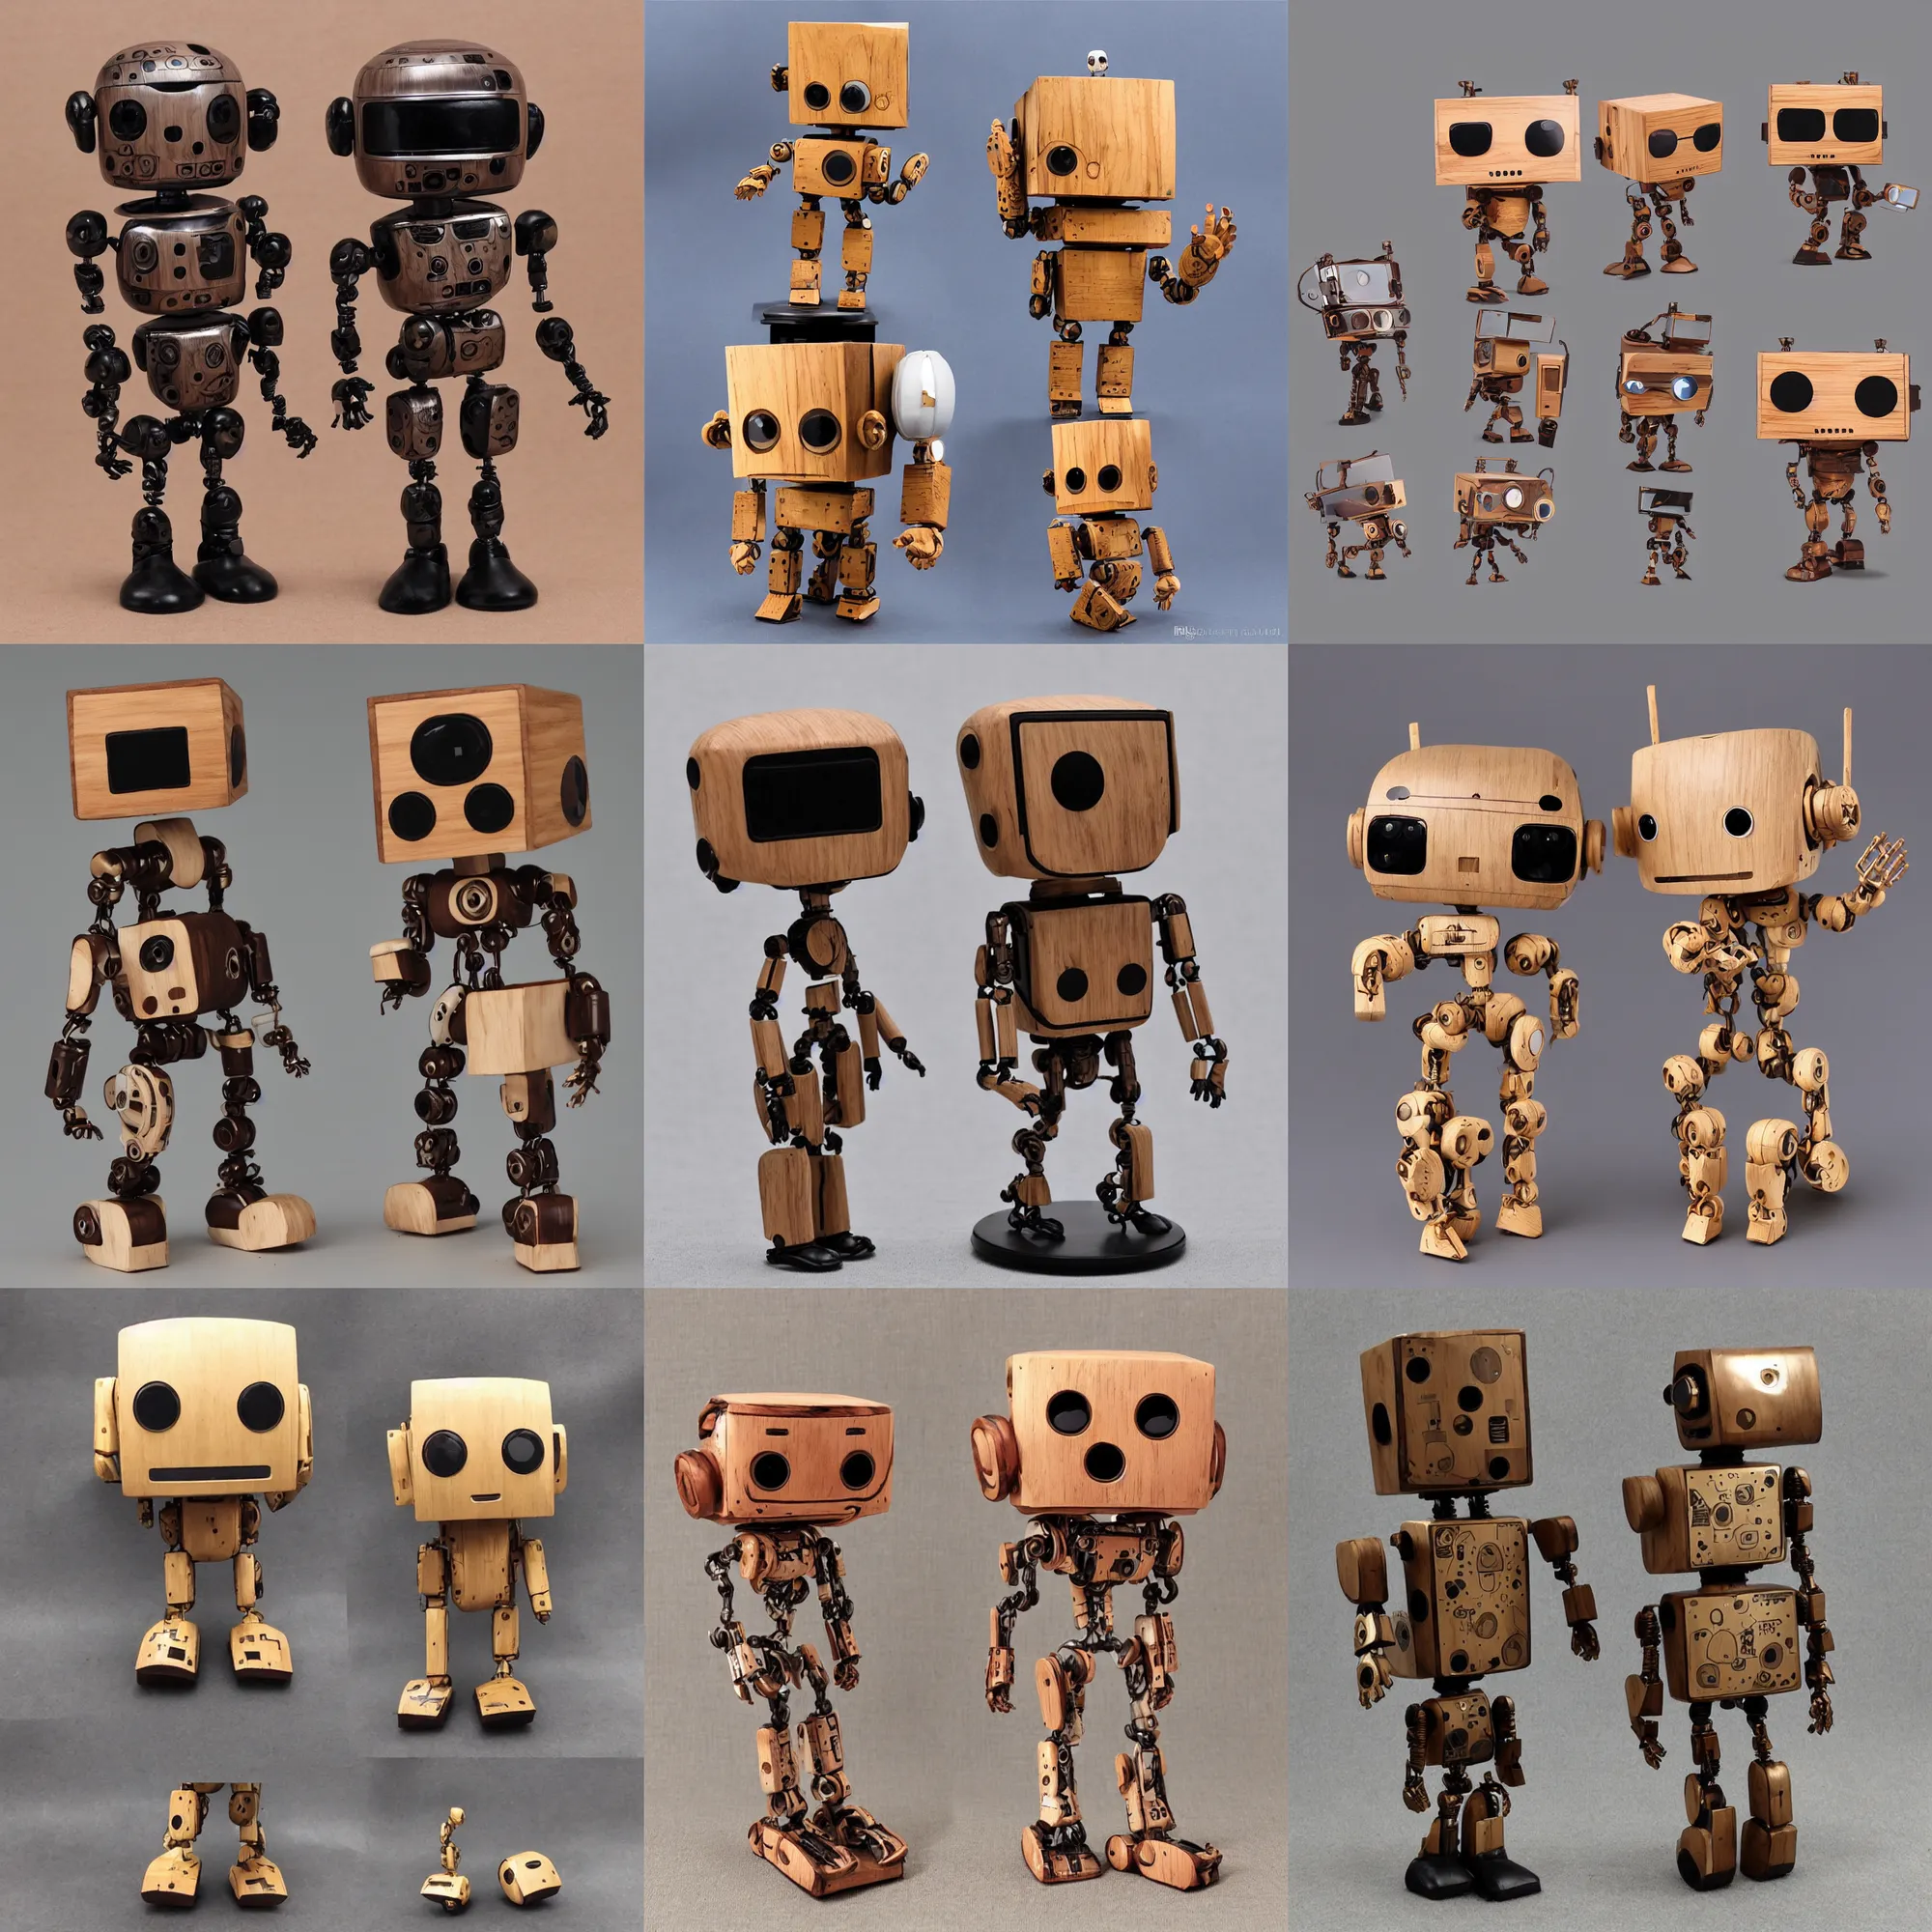 Prompt: realistic a wooden sculpture art toys collectible very cute android robot mascot figure cyberpunk as a funko